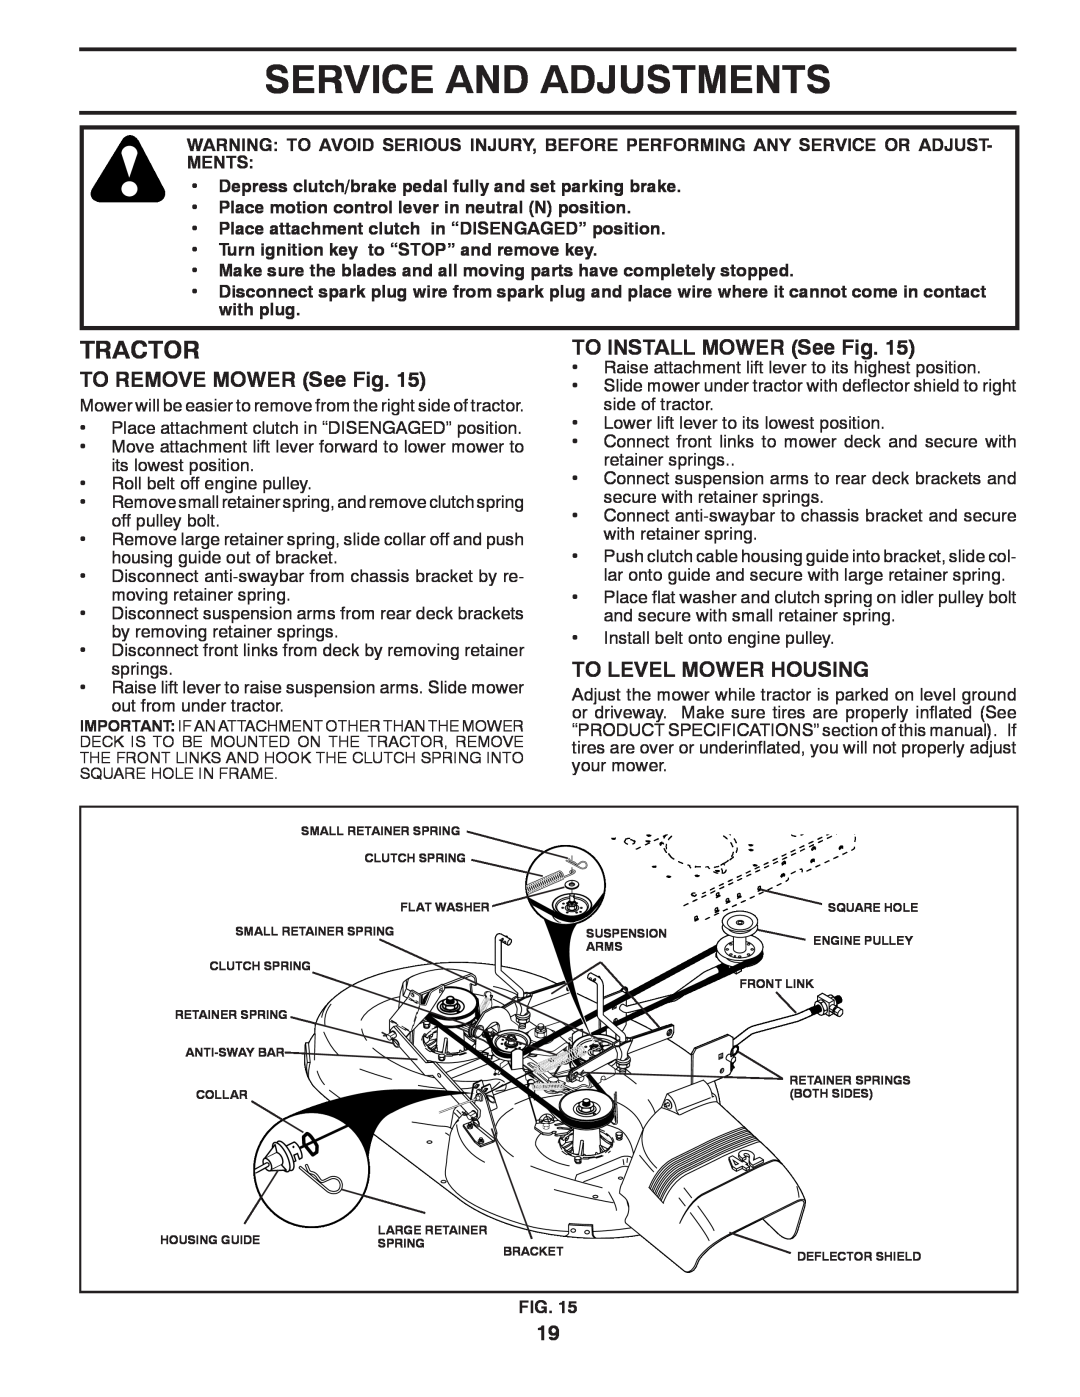 Poulan 418791 Service And Adjustments, TO REMOVE MOWER See Fig, TO INSTALL MOWER See Fig, To Level Mower Housing, Tractor 